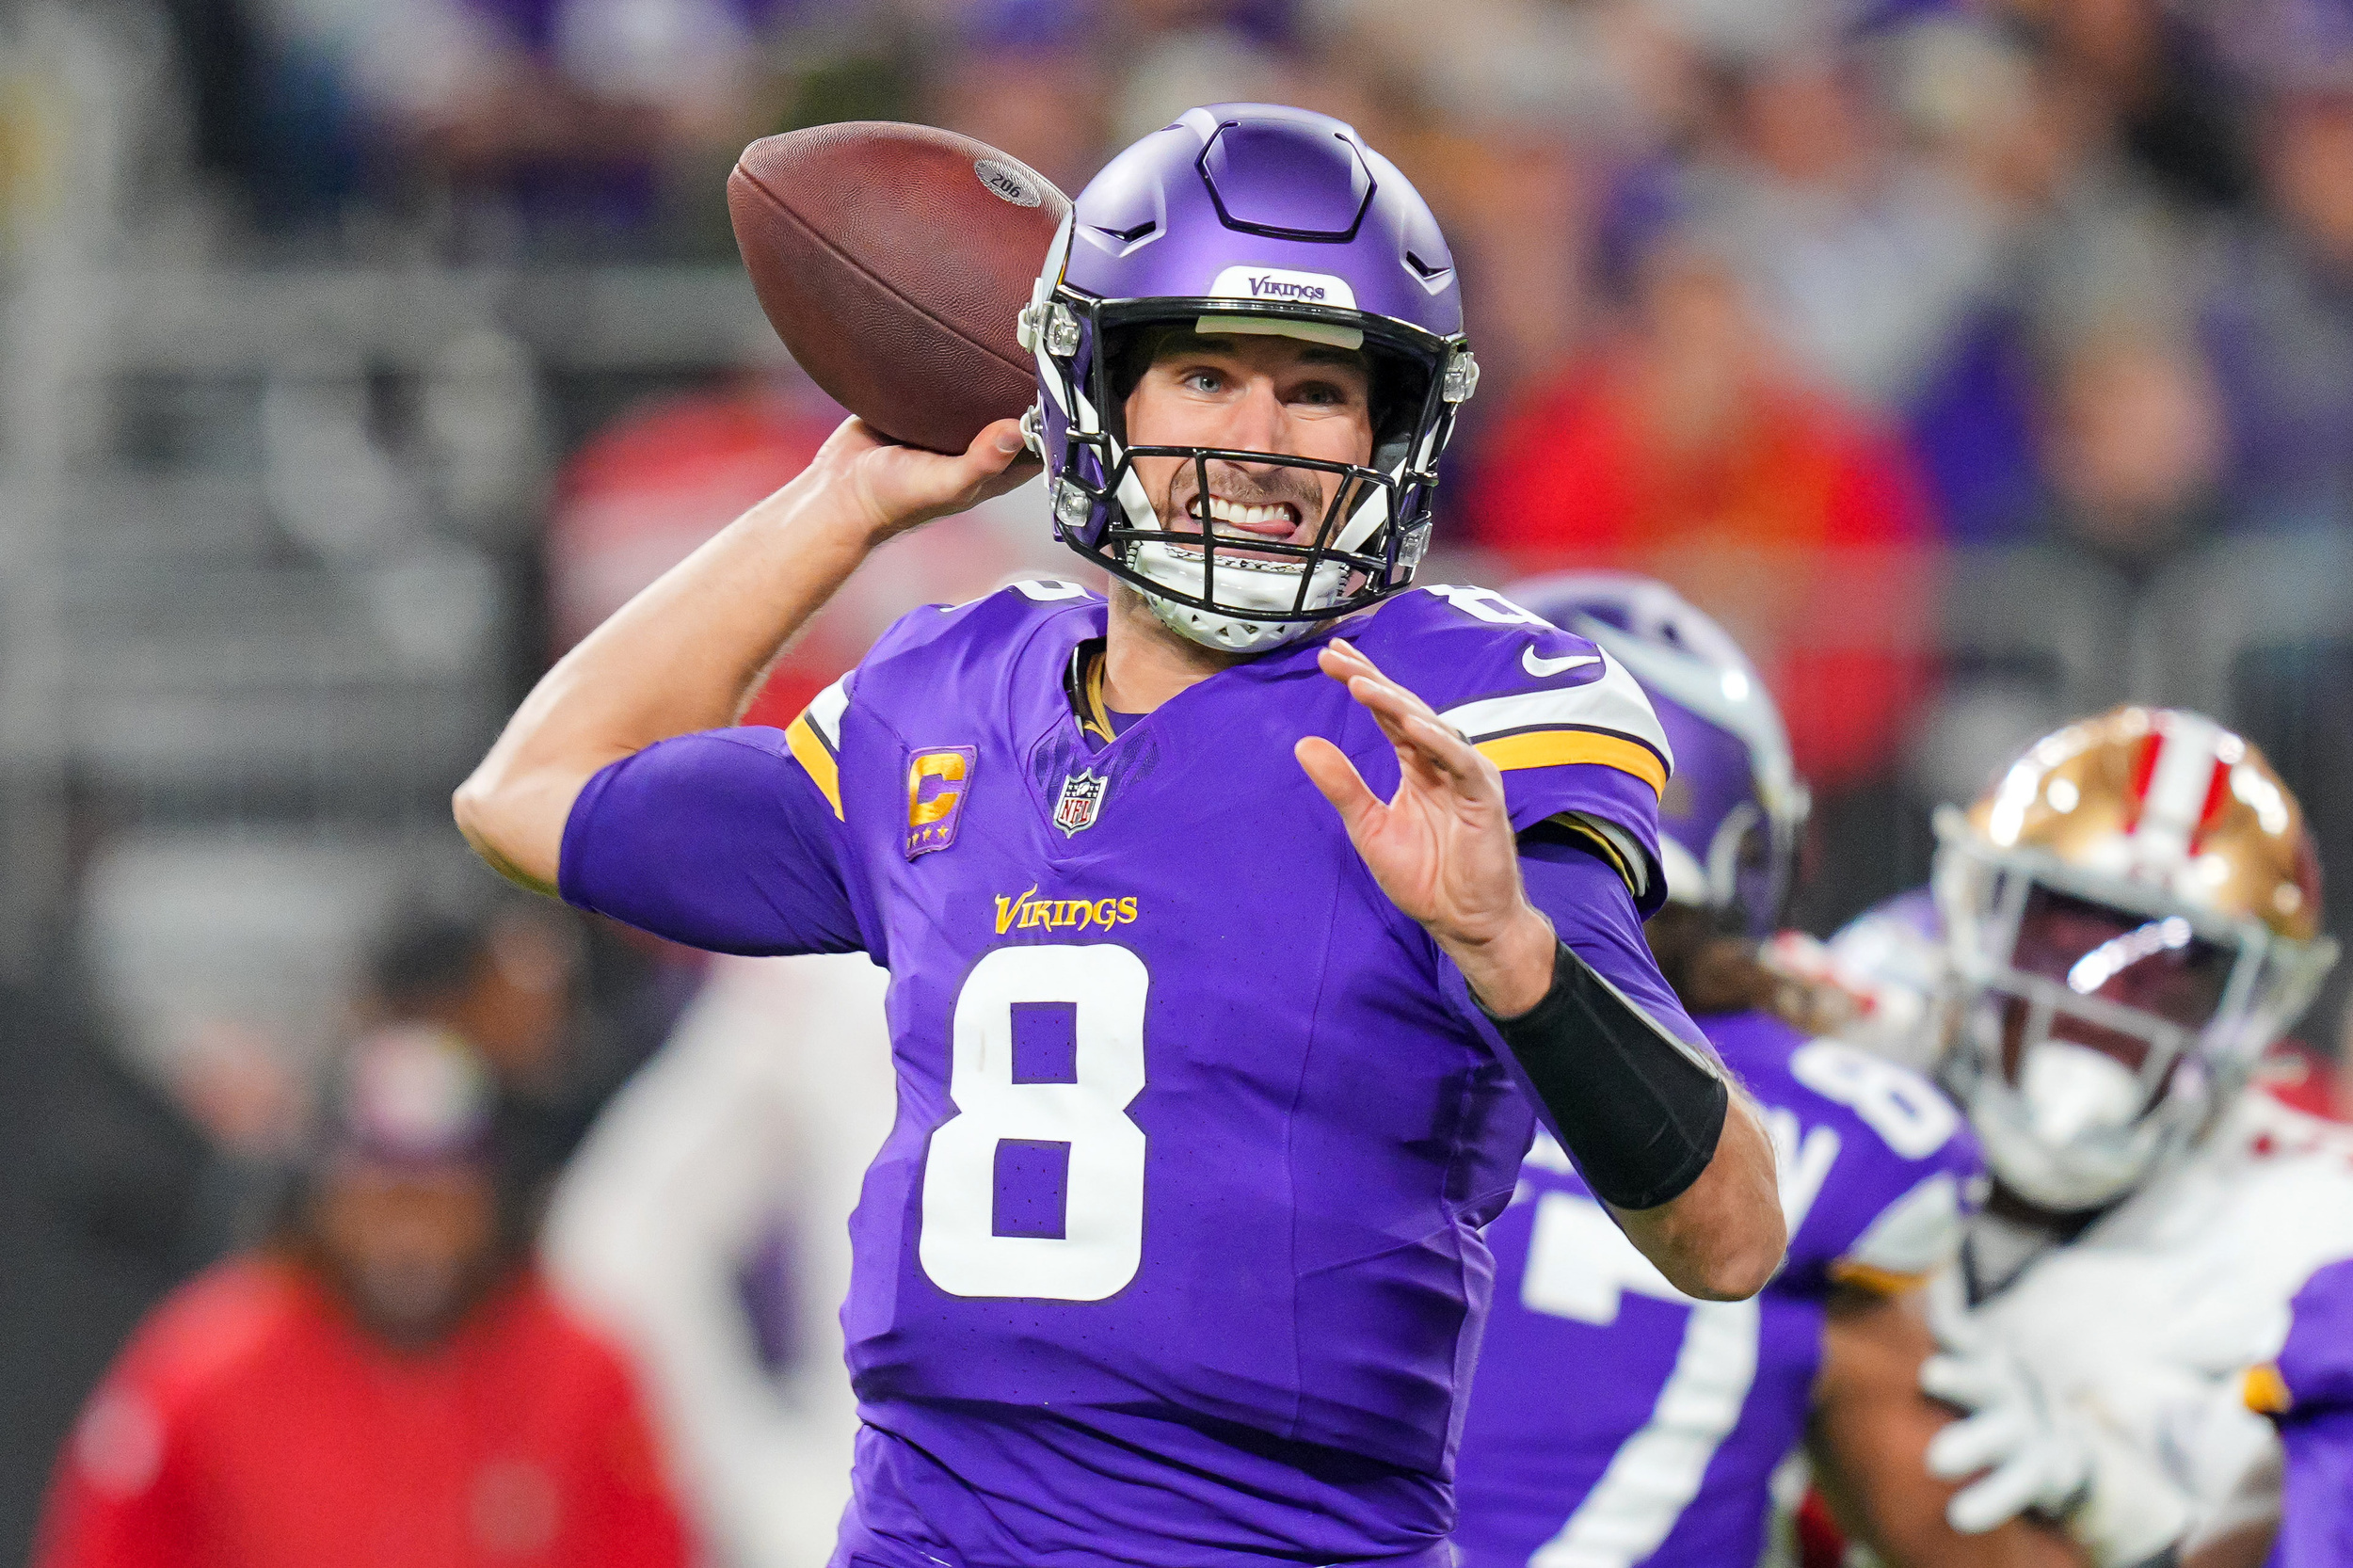 three qbs that could cash-in under the nfl's new salary cap